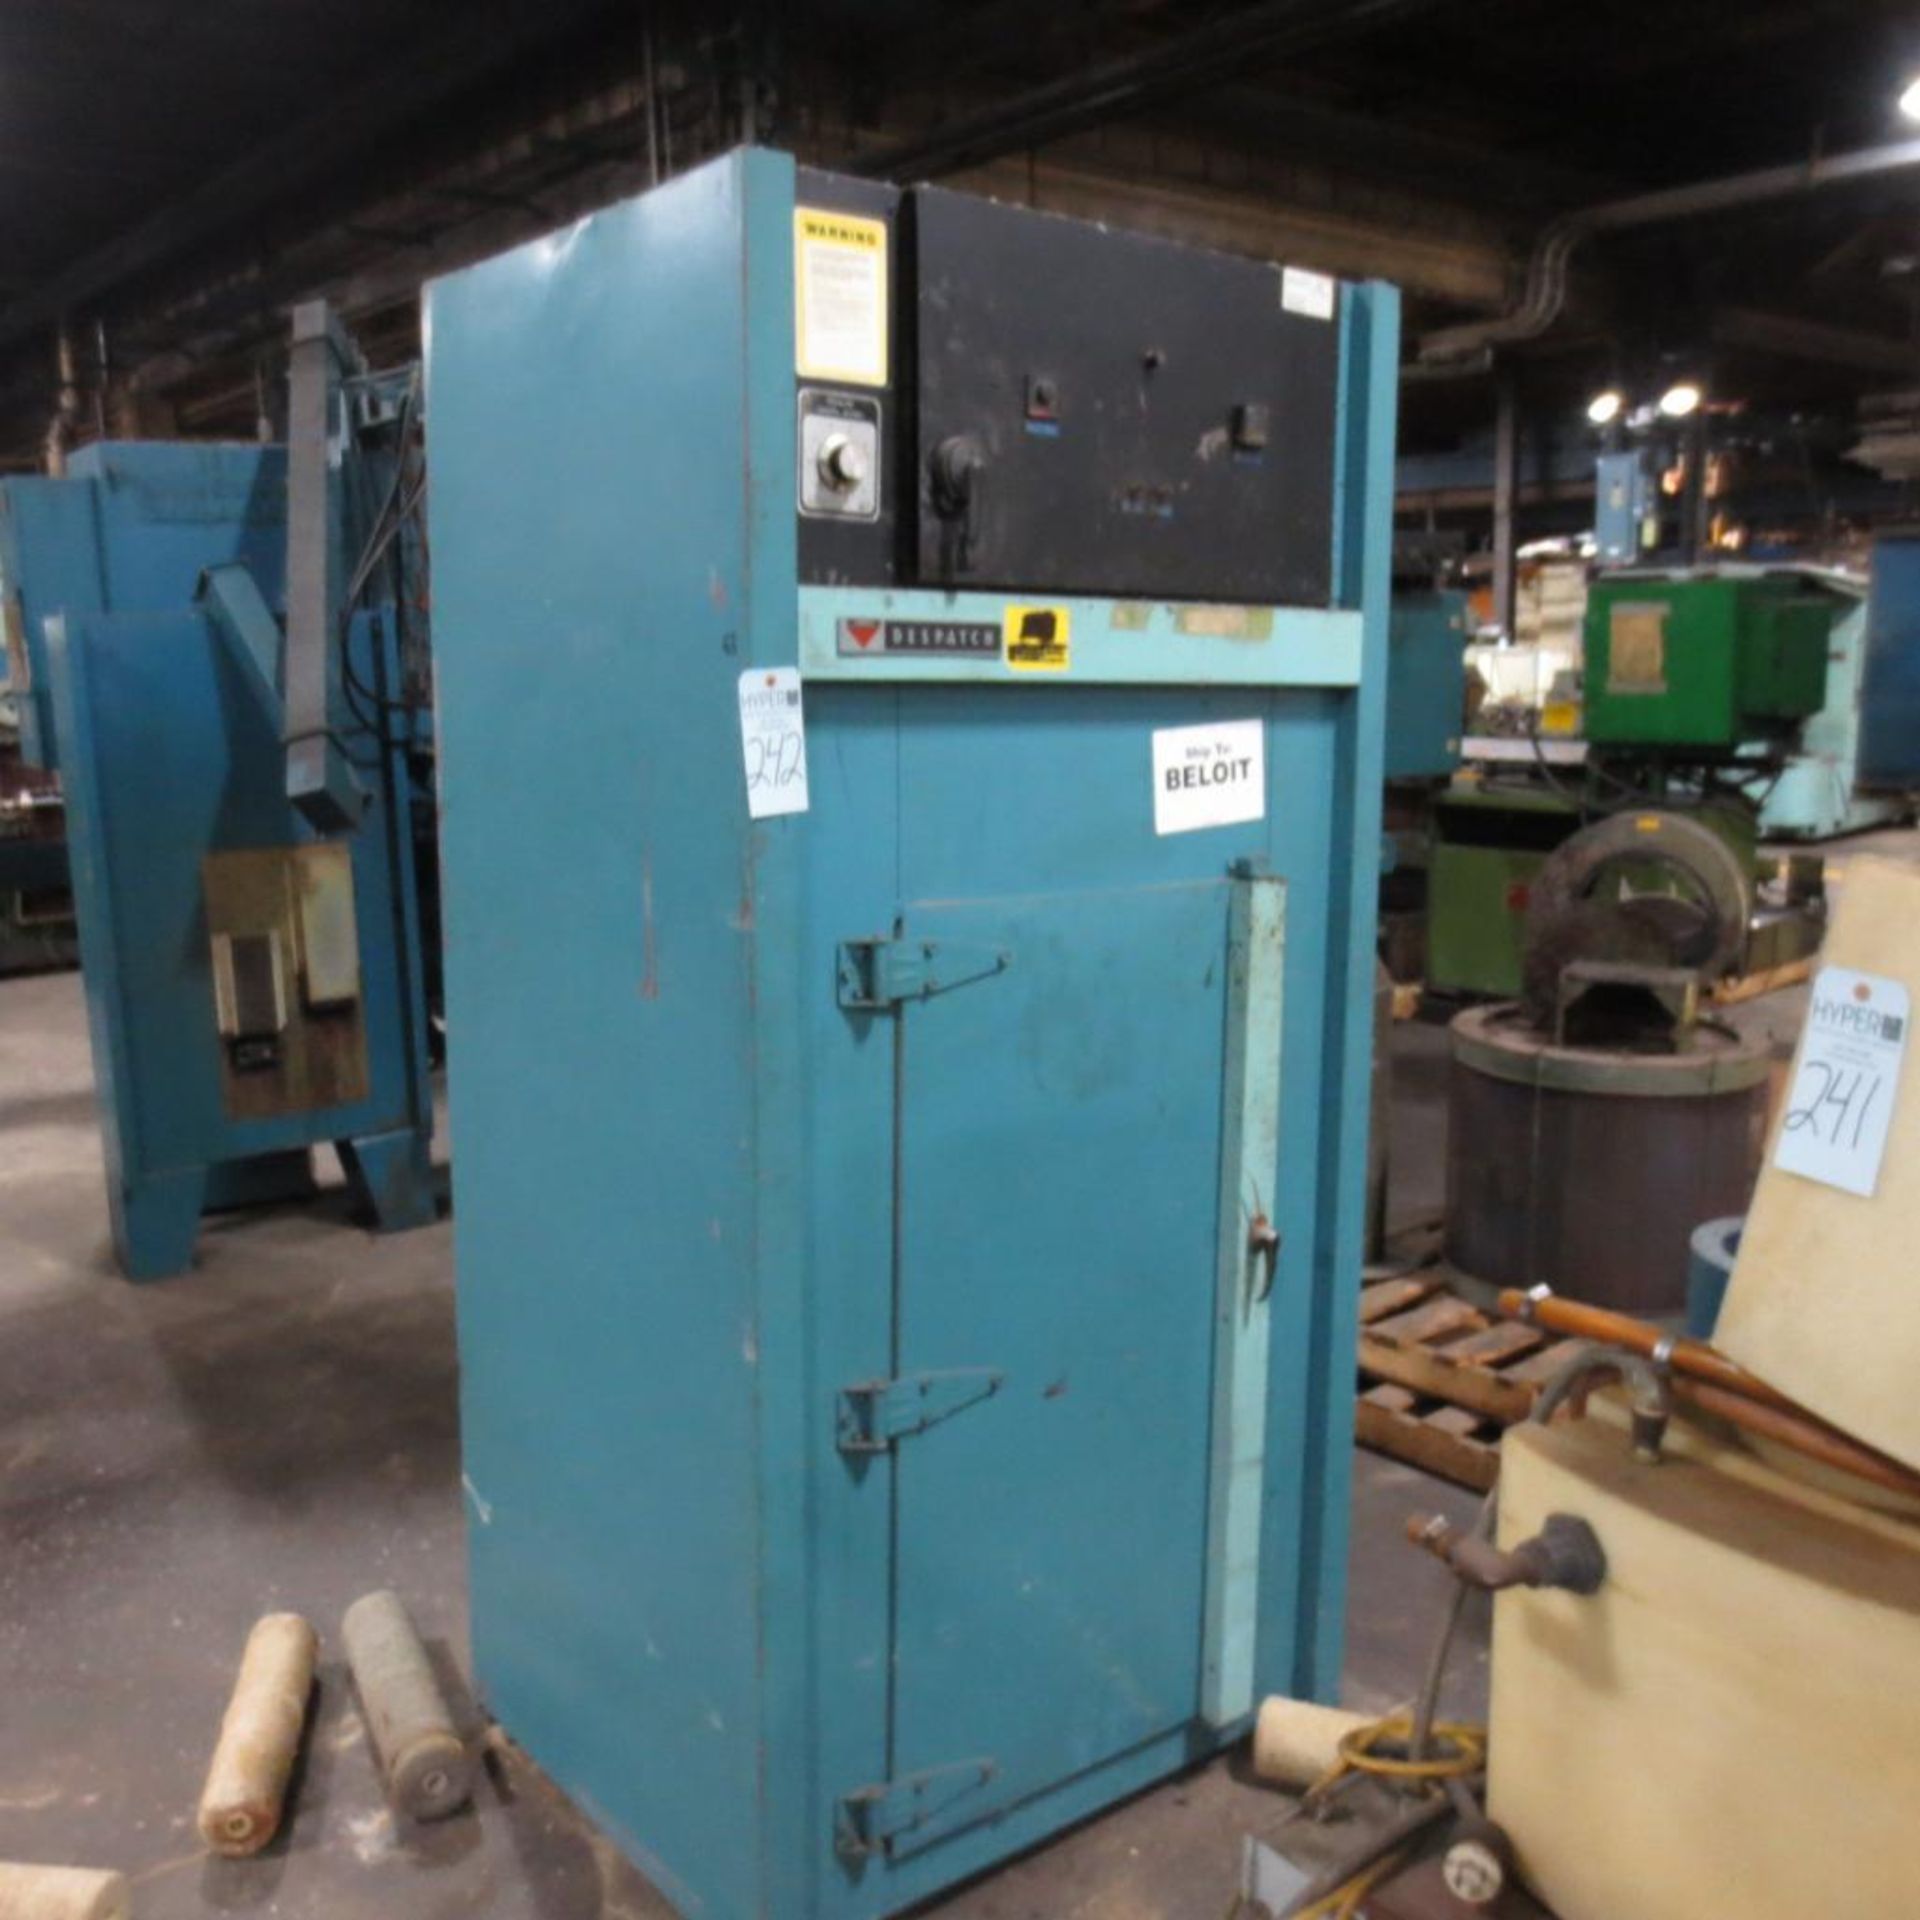 Despatch Type BBC-210 Oven, Temp 500 F, 12 KW, 3/1 PH, 240 / 120 V, S/N 102168. Loading Fee is $50.0